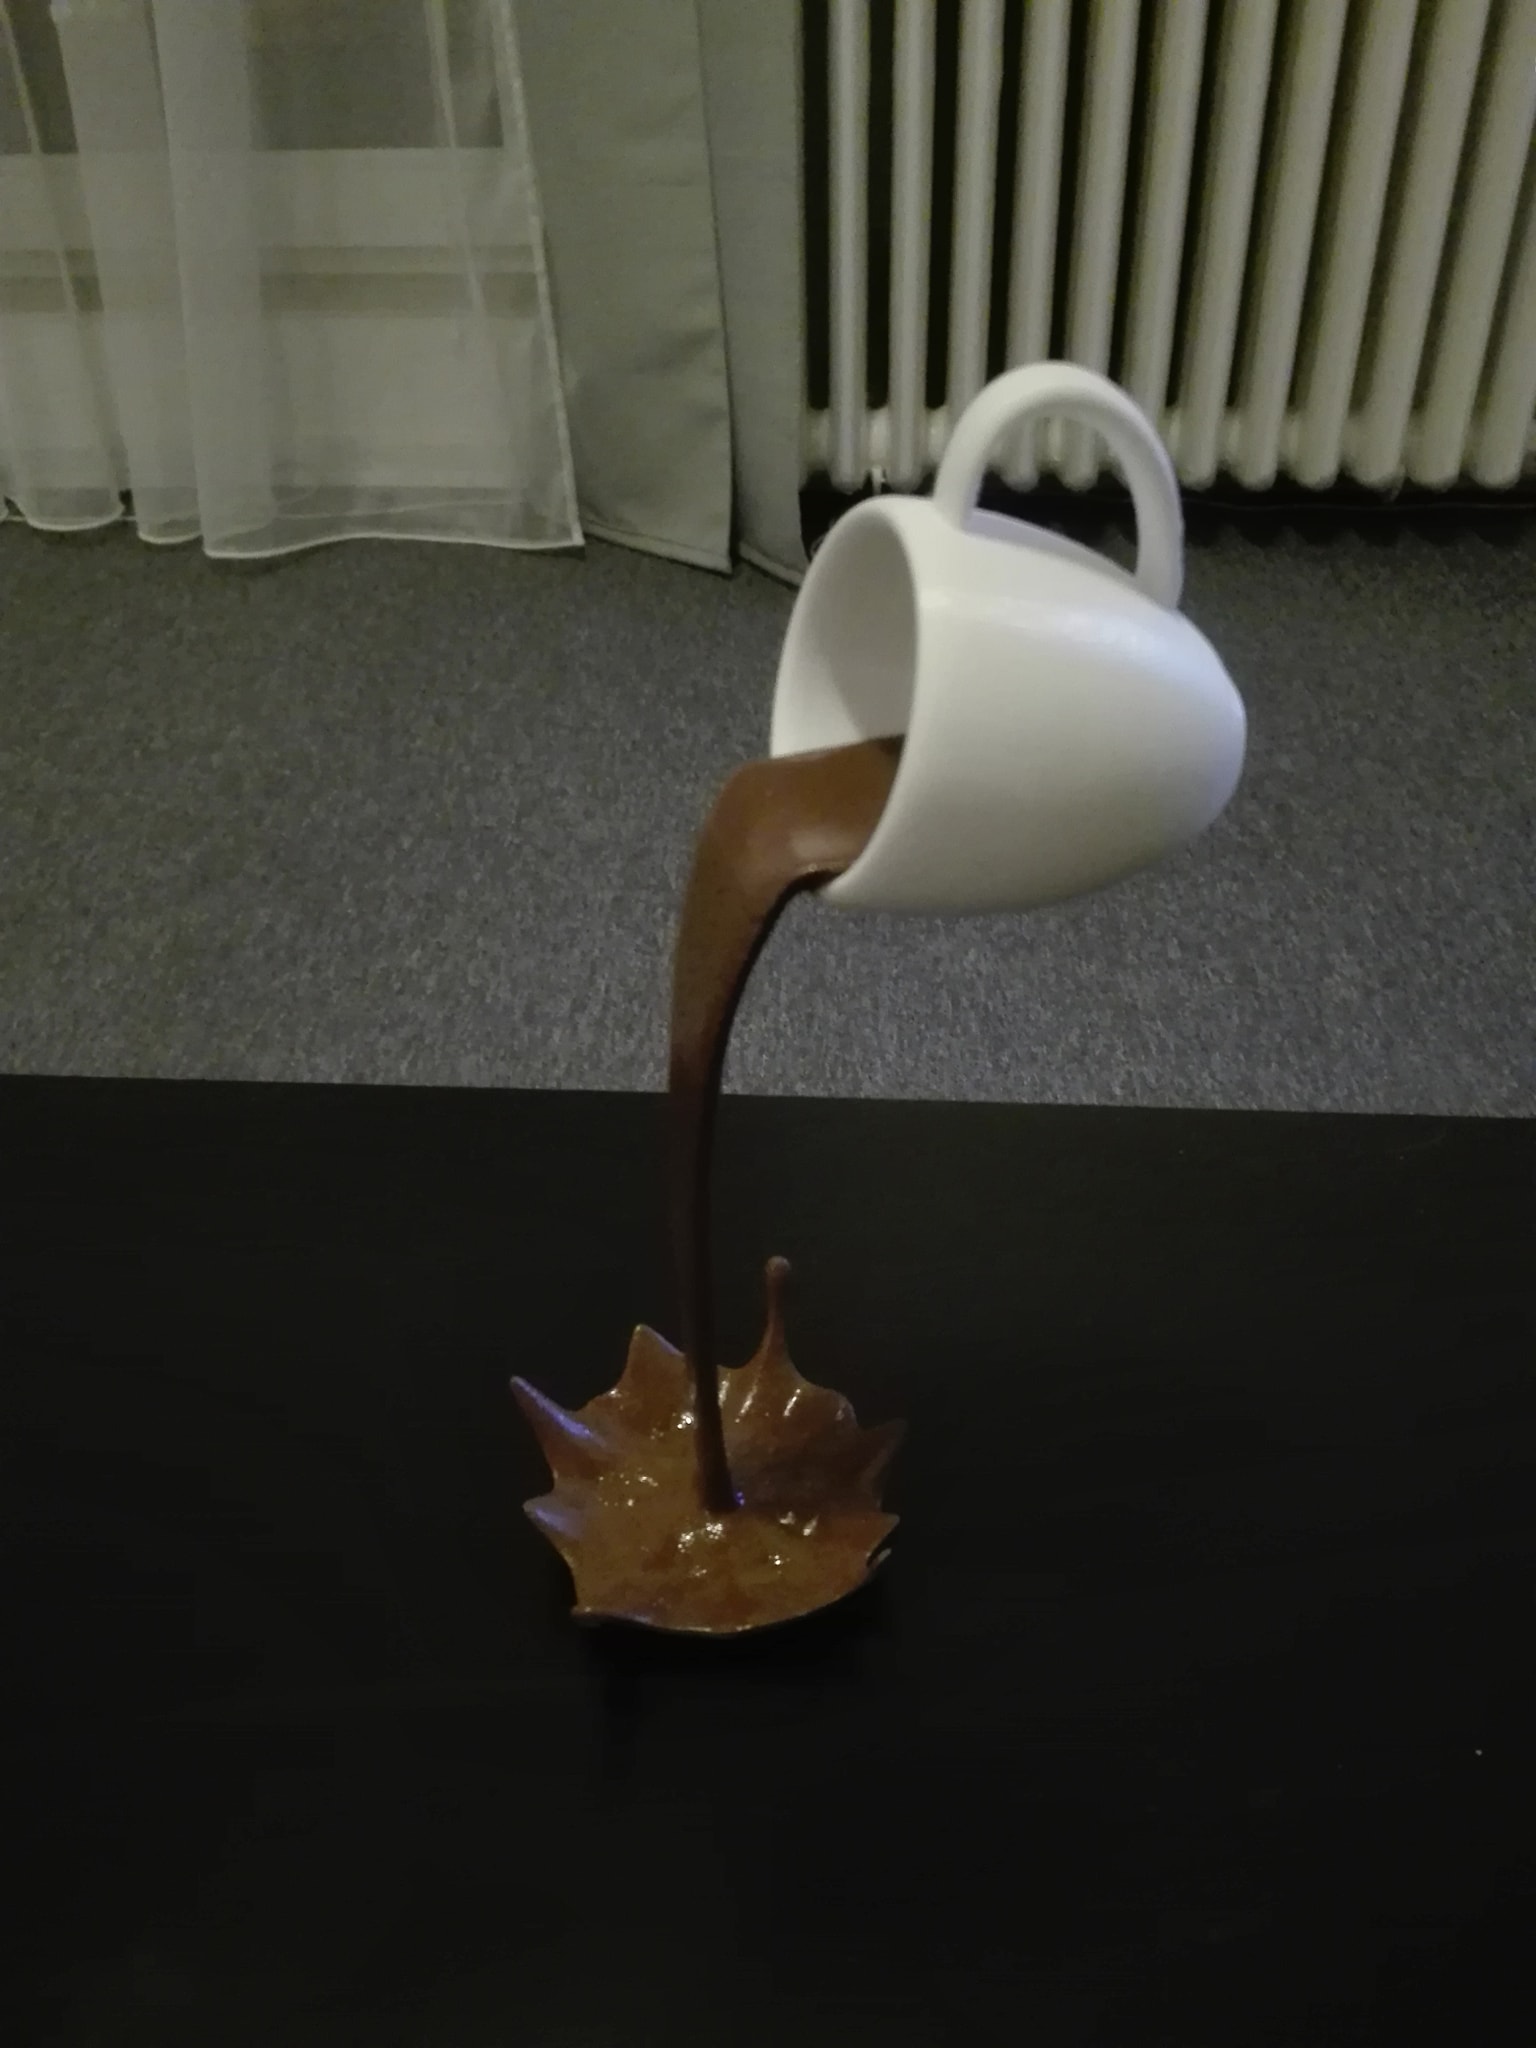 Floating Cup of Coffee